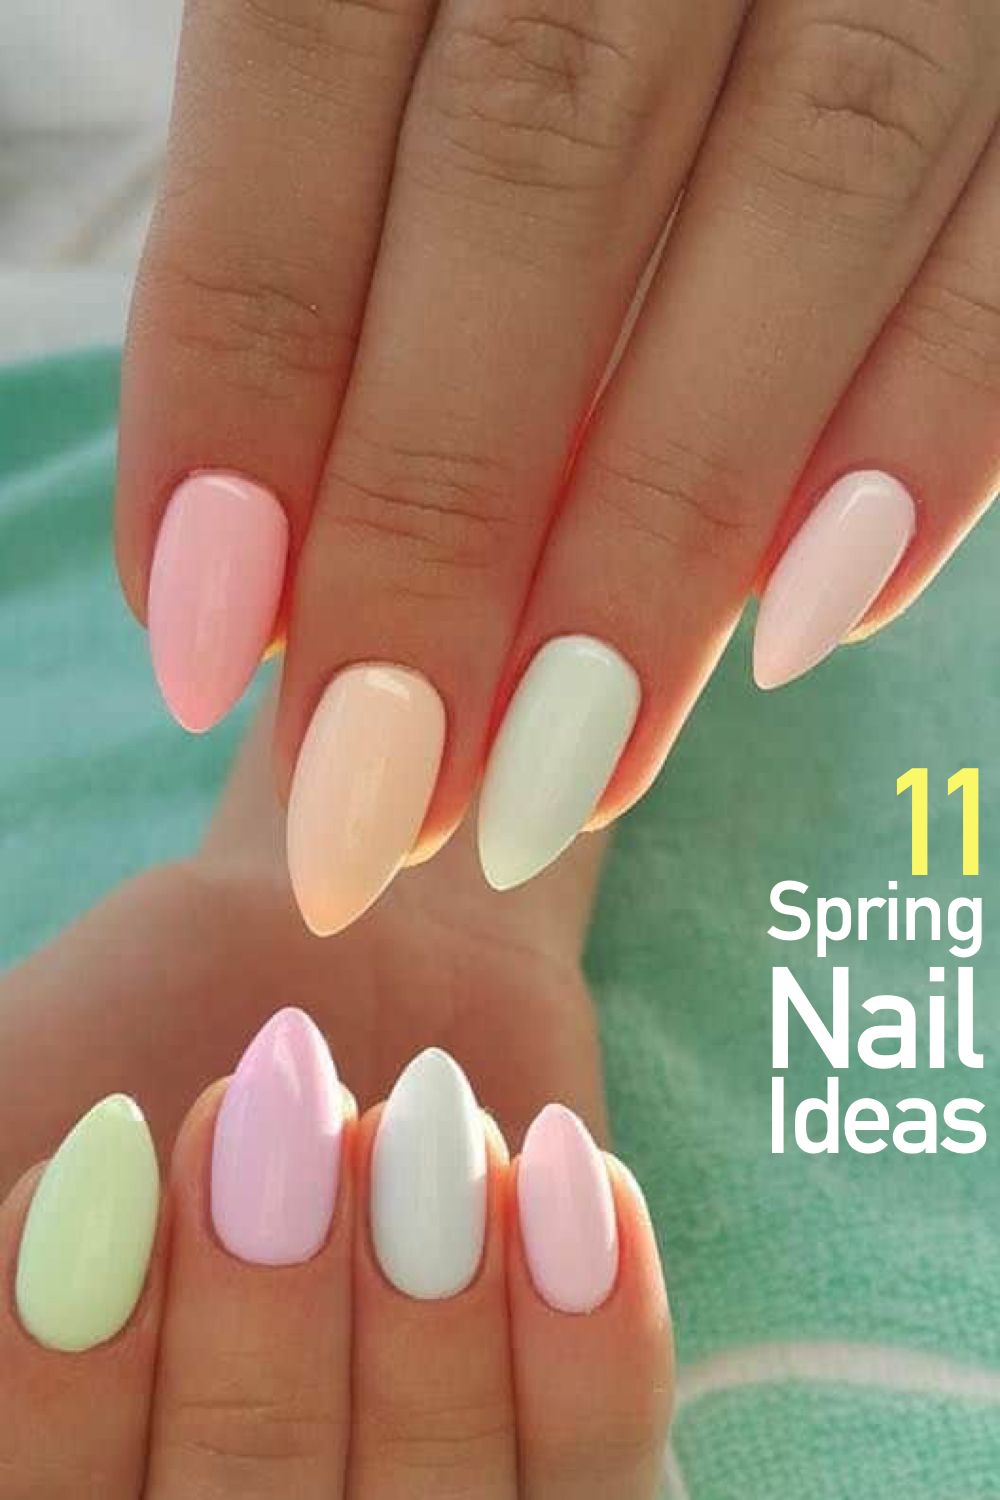 Unique Spring Nails And Spa Daily Nail Art And Design